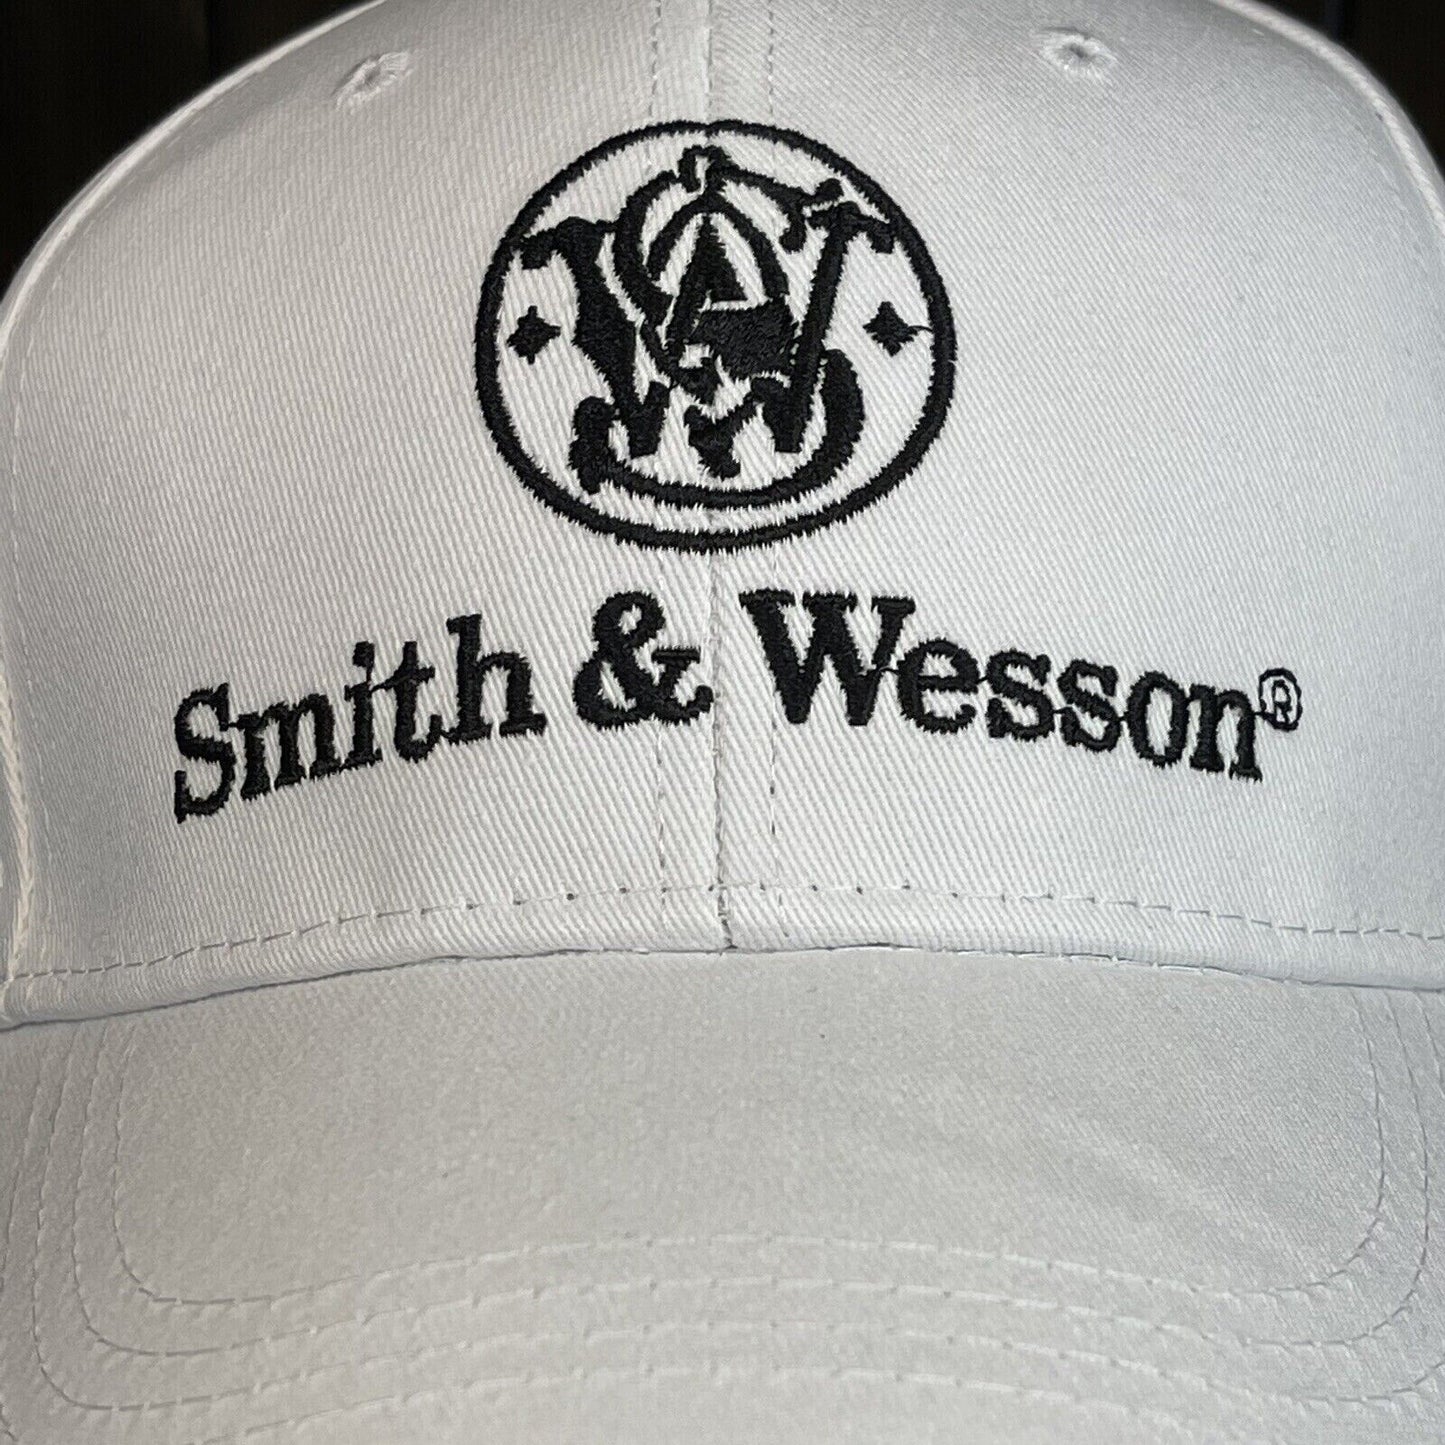 SMITH AND WESSON STYLE WHITE HAT.